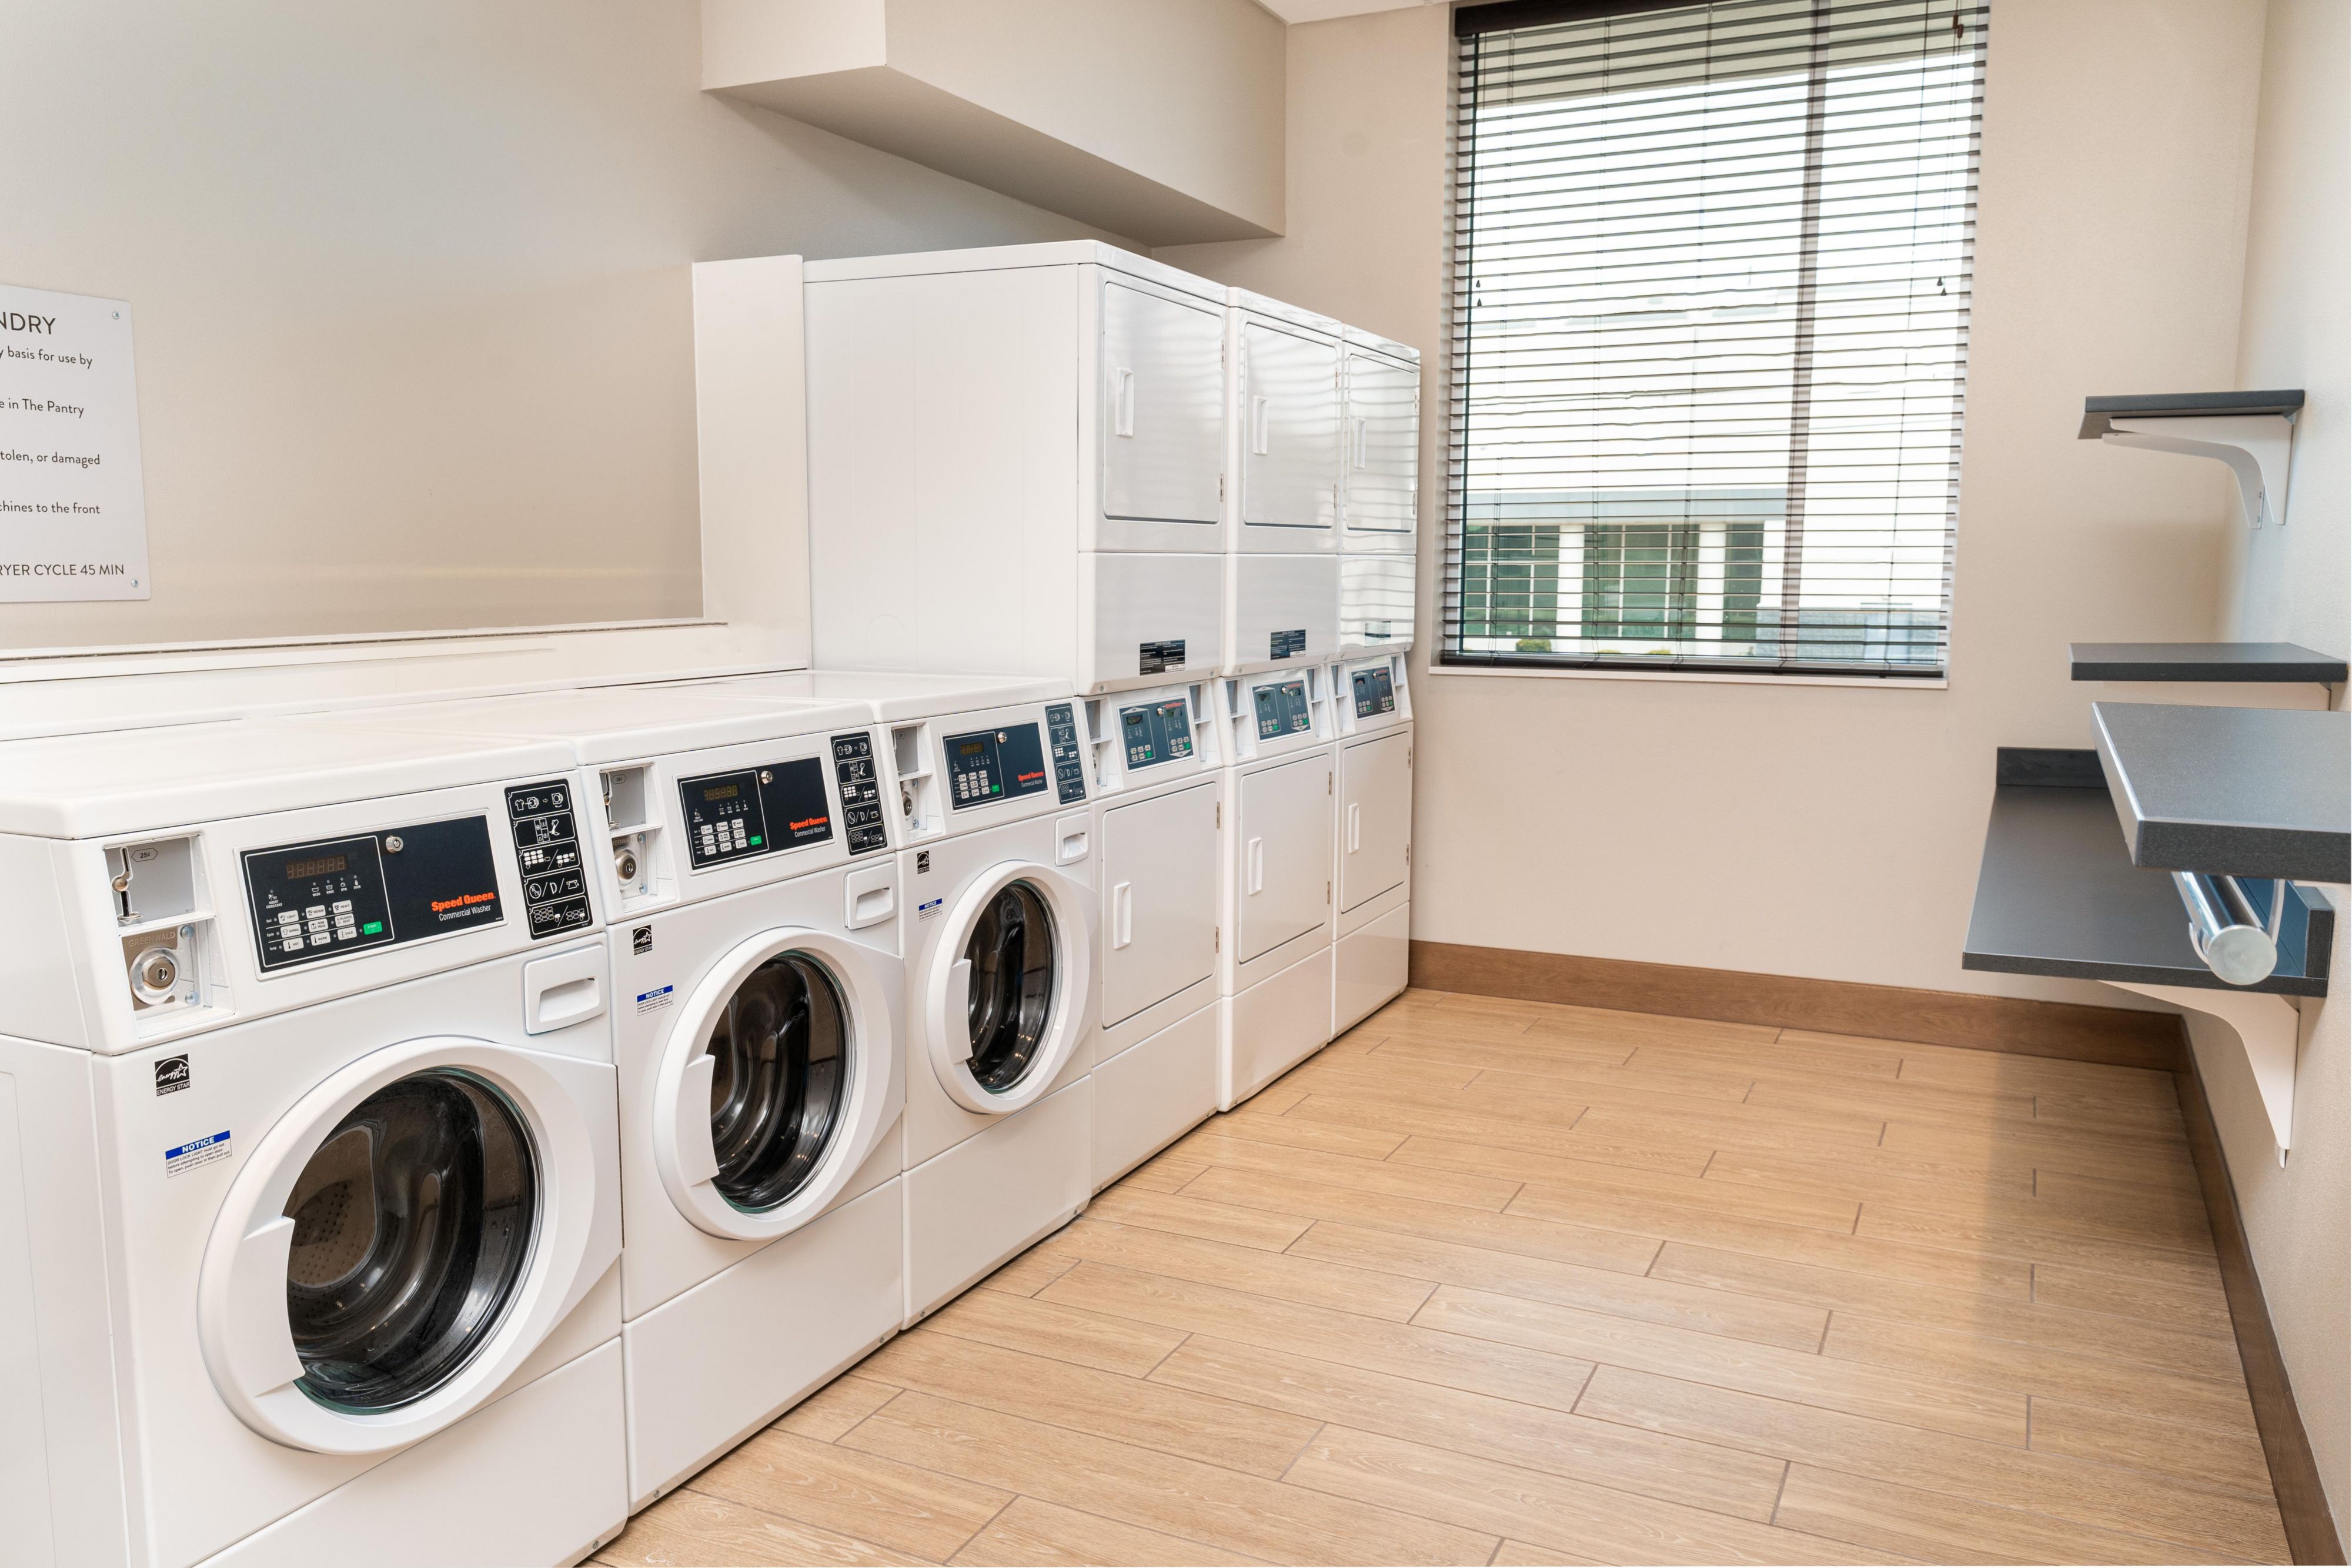 Free on-site guest self-laundry facility. We also offer dry cleaning/laundry same day services.